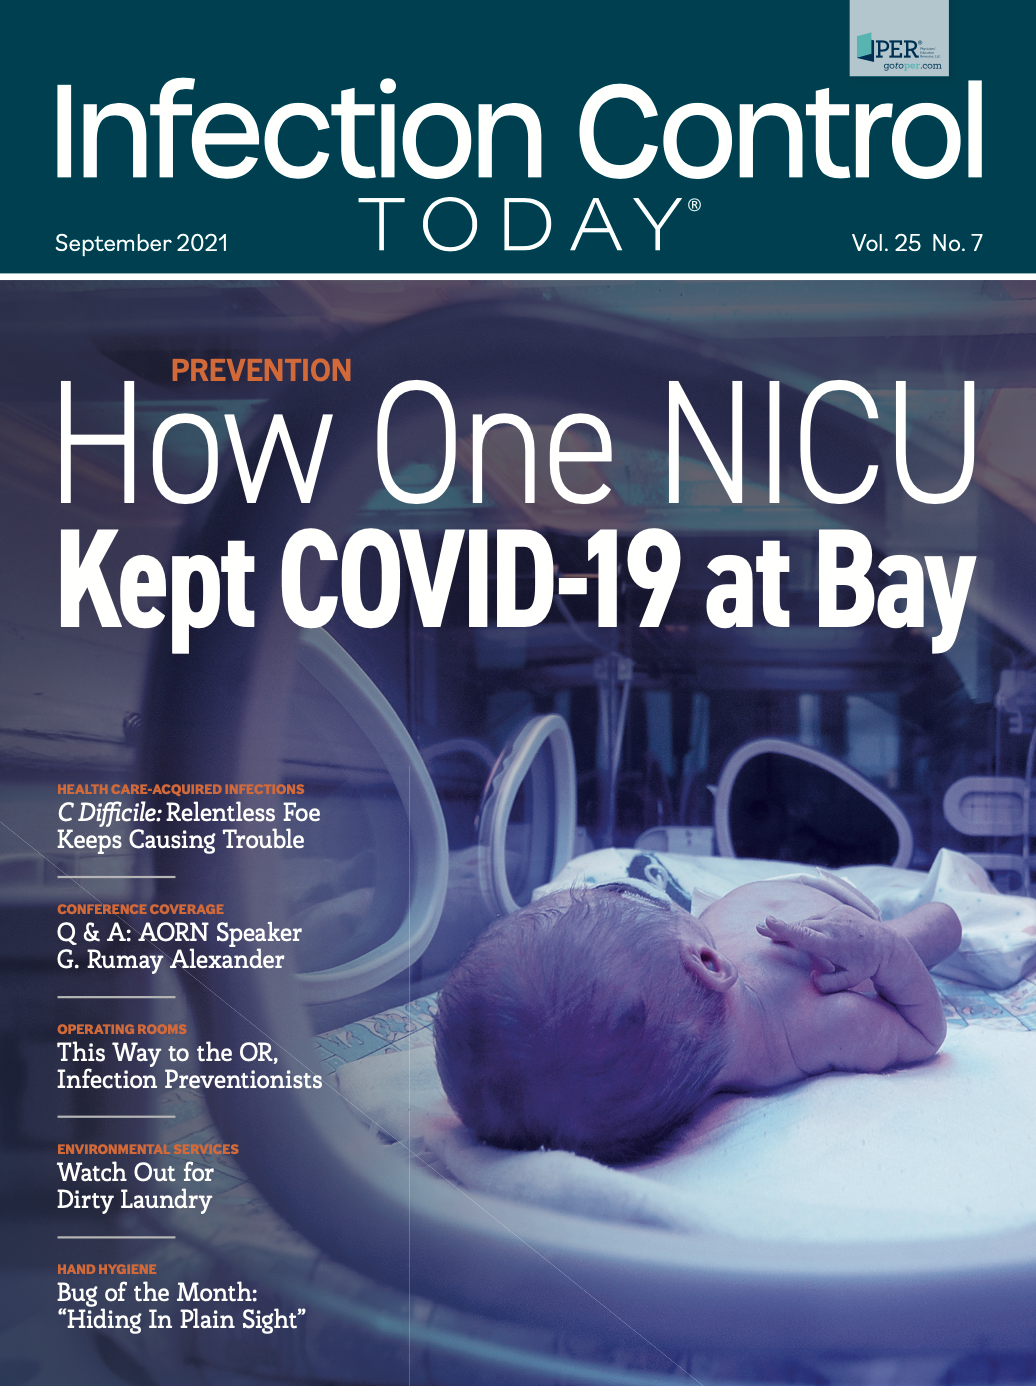 Infection Control Today, September 2021 (Vol. 25 No. 7)